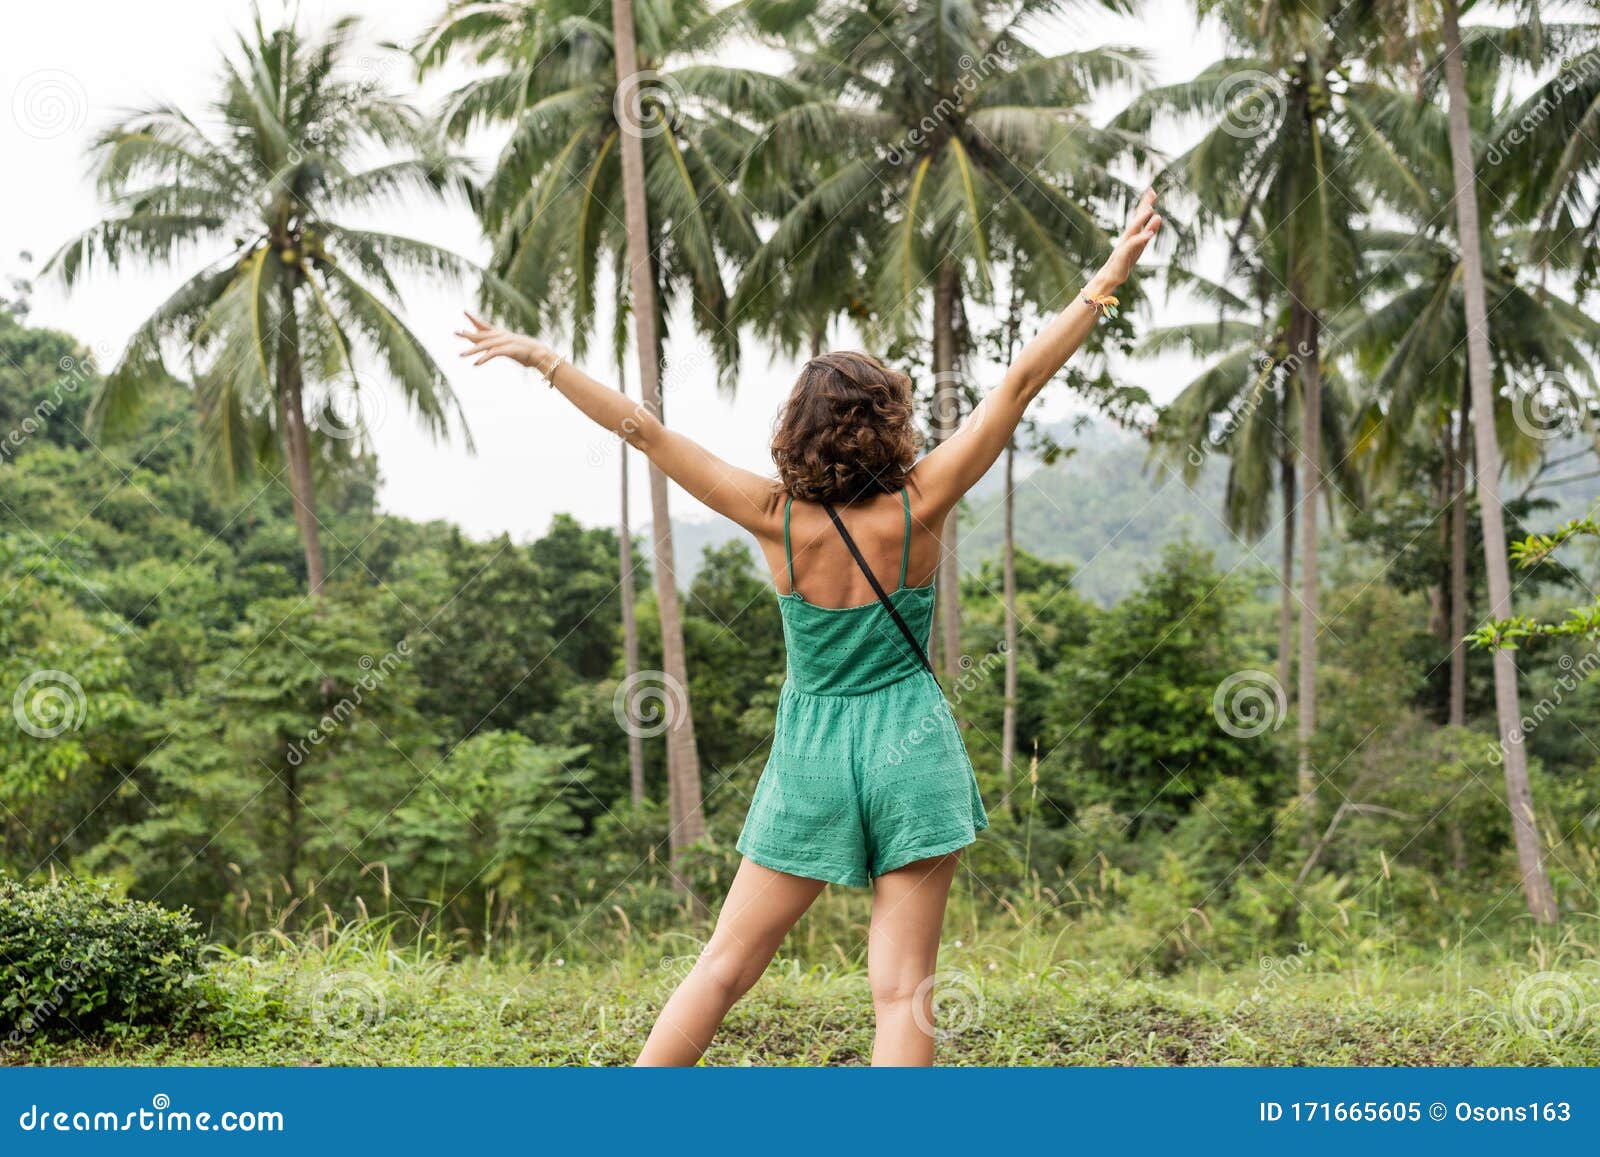 Girl among Tropical Palm Trees in the Jungle on an Island in Thailand ...